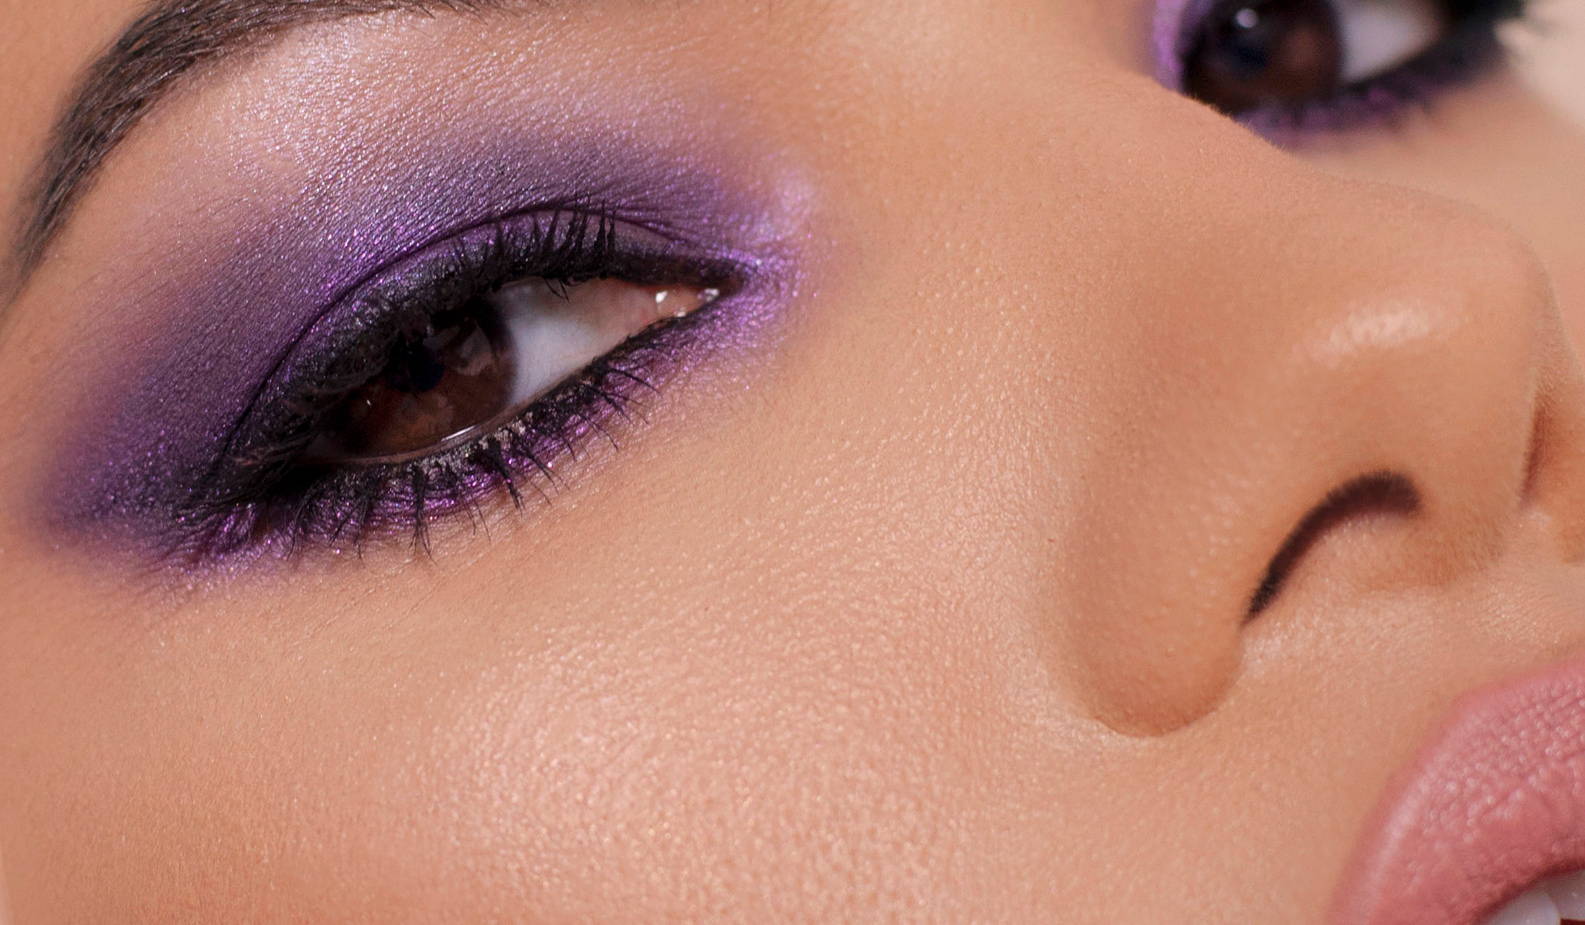 An unconventionally gorgeous take on holiday makeup